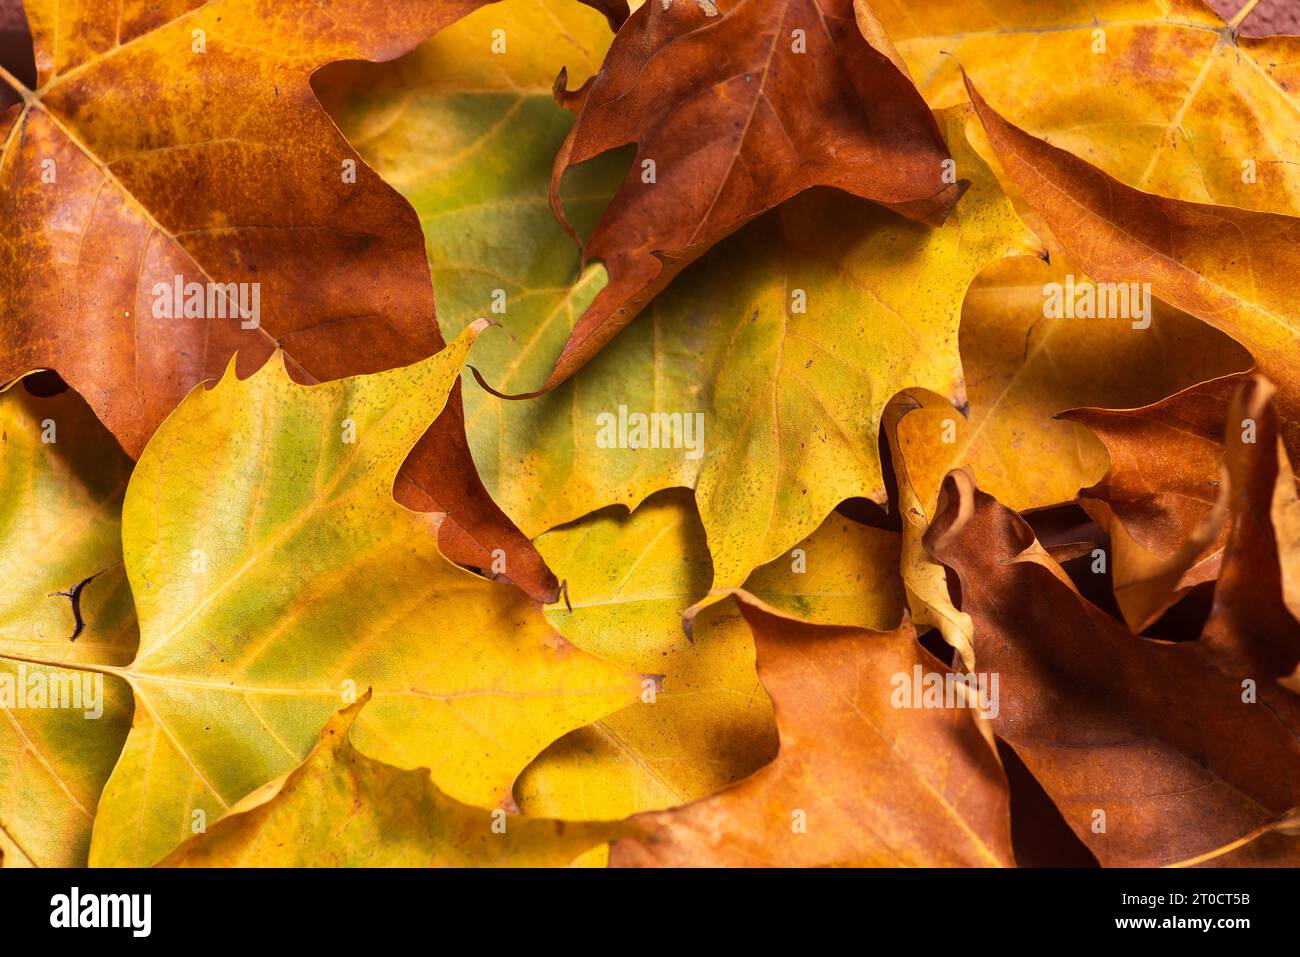 Autumn maple tree leaves full frame arrangement with many colorful leaves Stock Photo